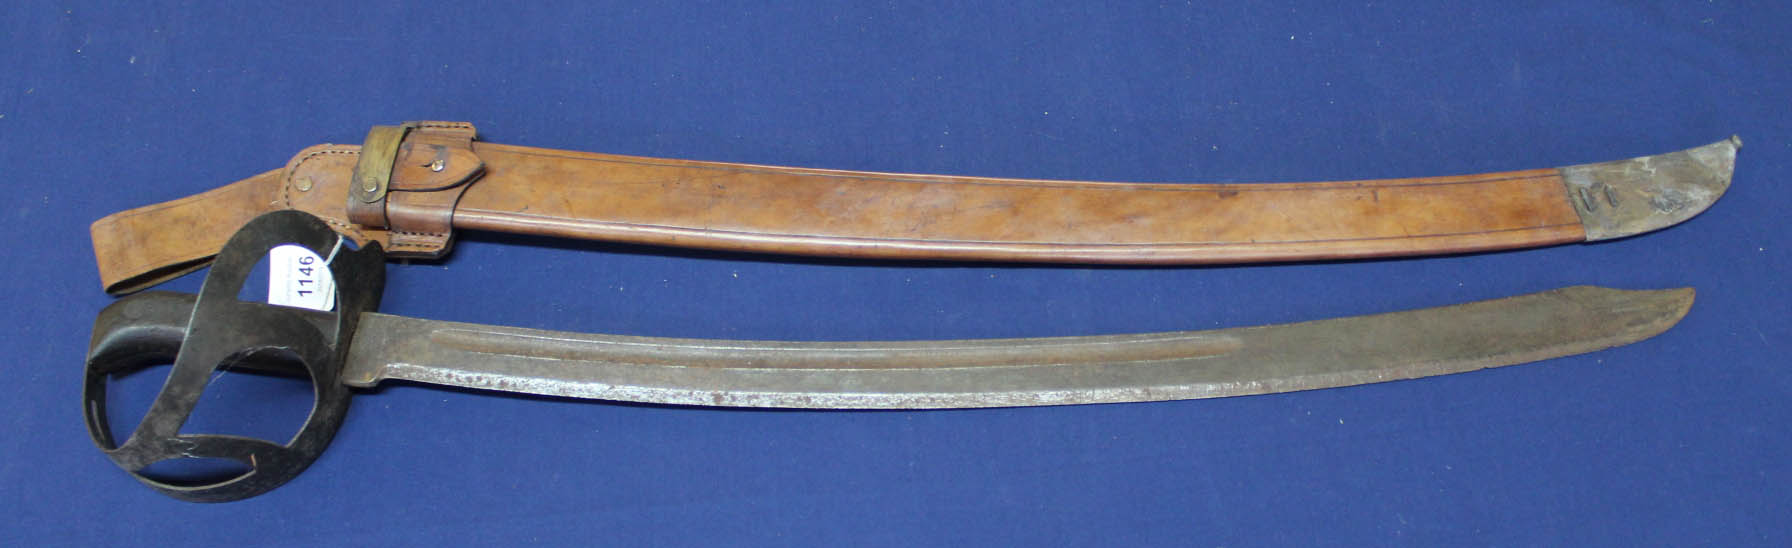 A Dutch Klewang 'cutlass' complete with leather scabbard and frog